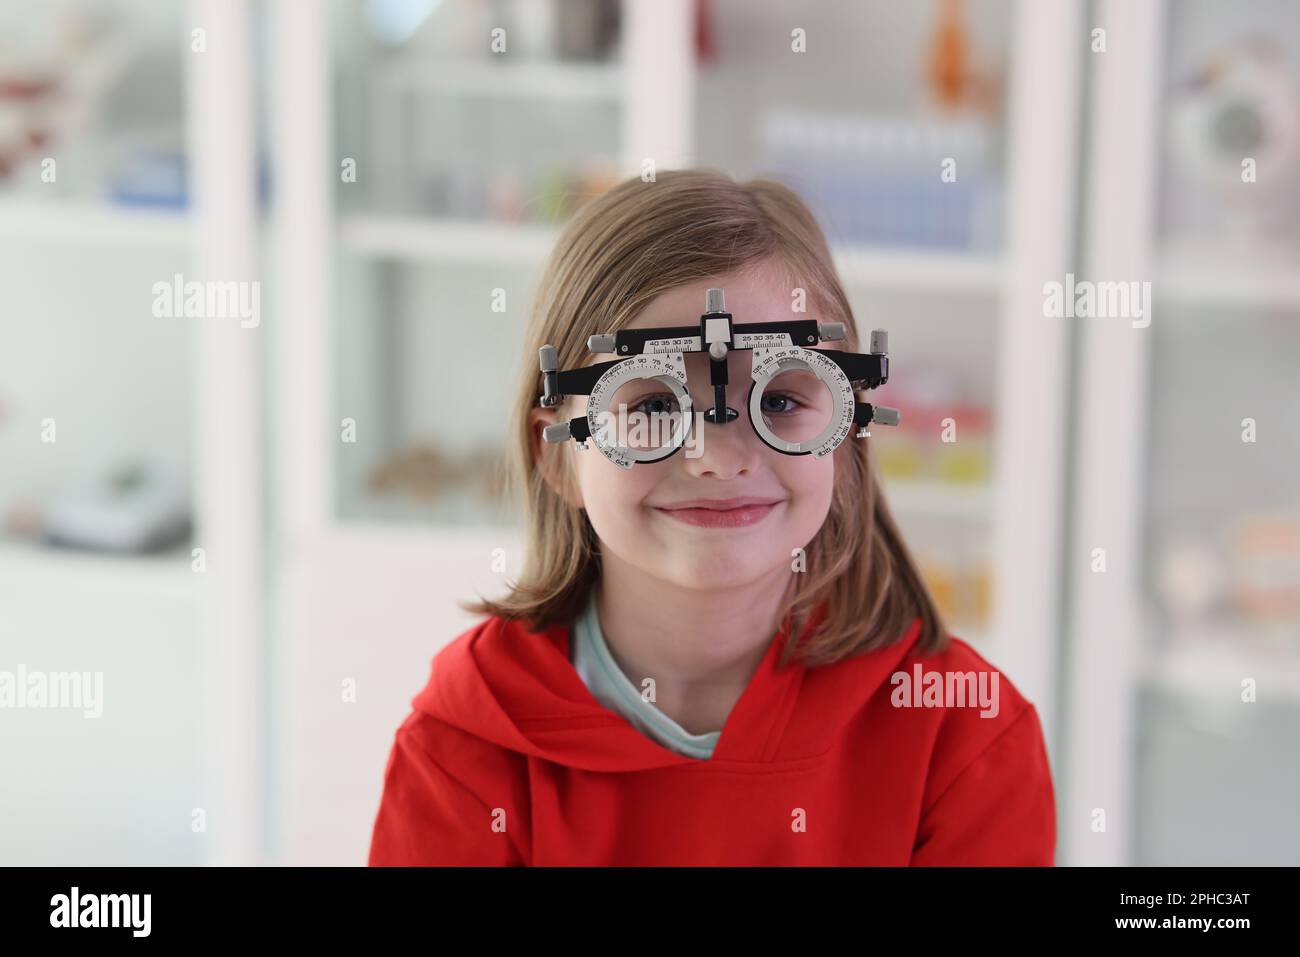 Girl with eye examining tool at ophthalmologist appointment Stock Photo